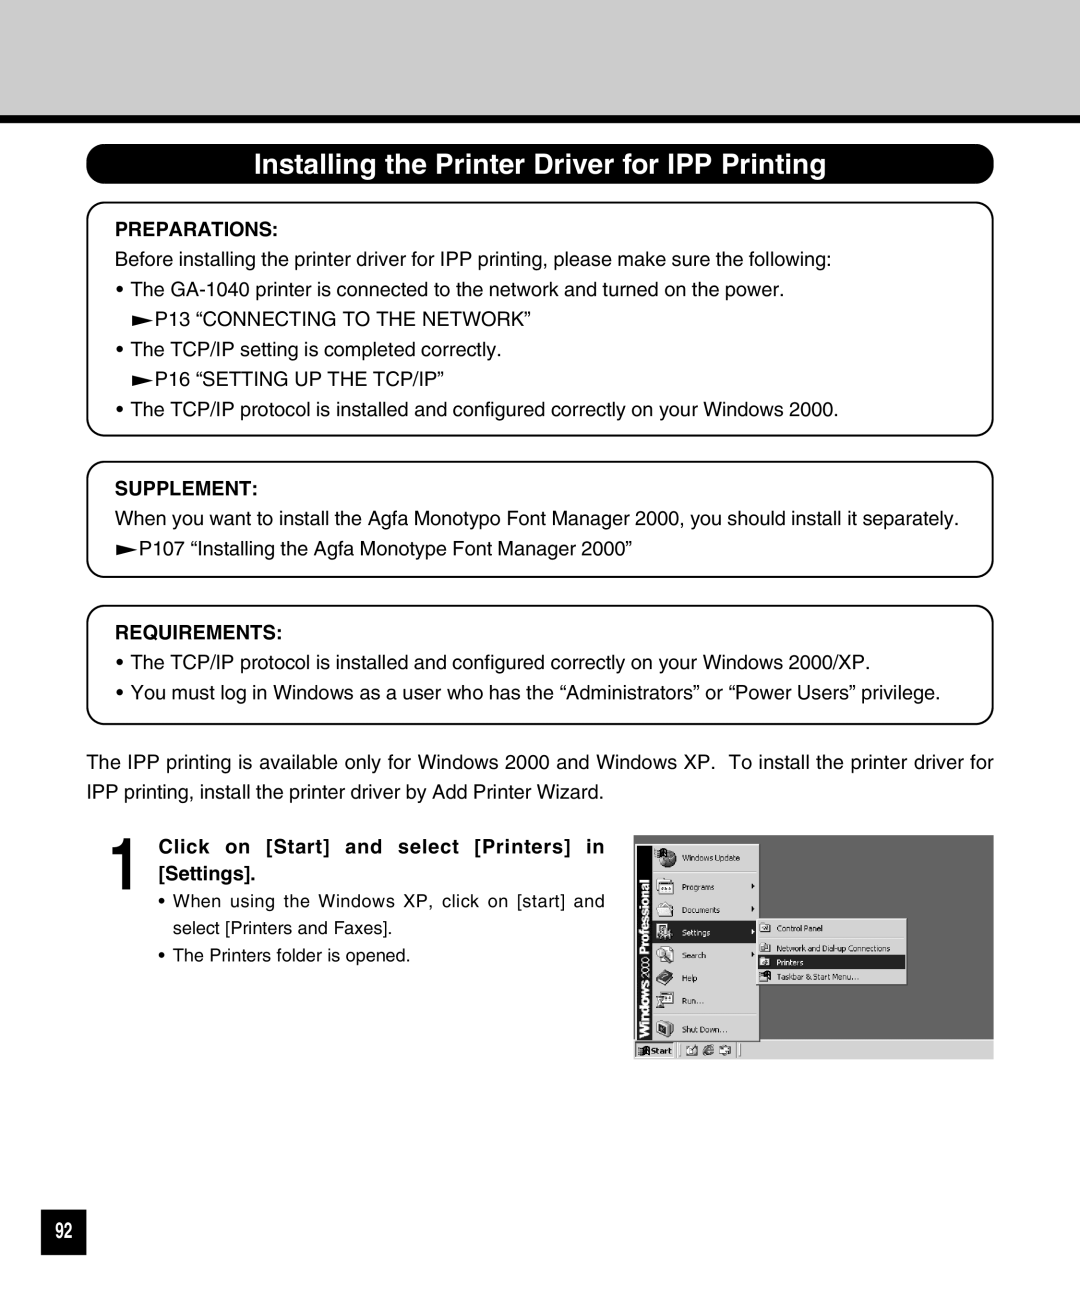 Toshiba GA-1040 manual Installing the Printer Driver for IPP Printing, Preparations, Supplement, Requirements 